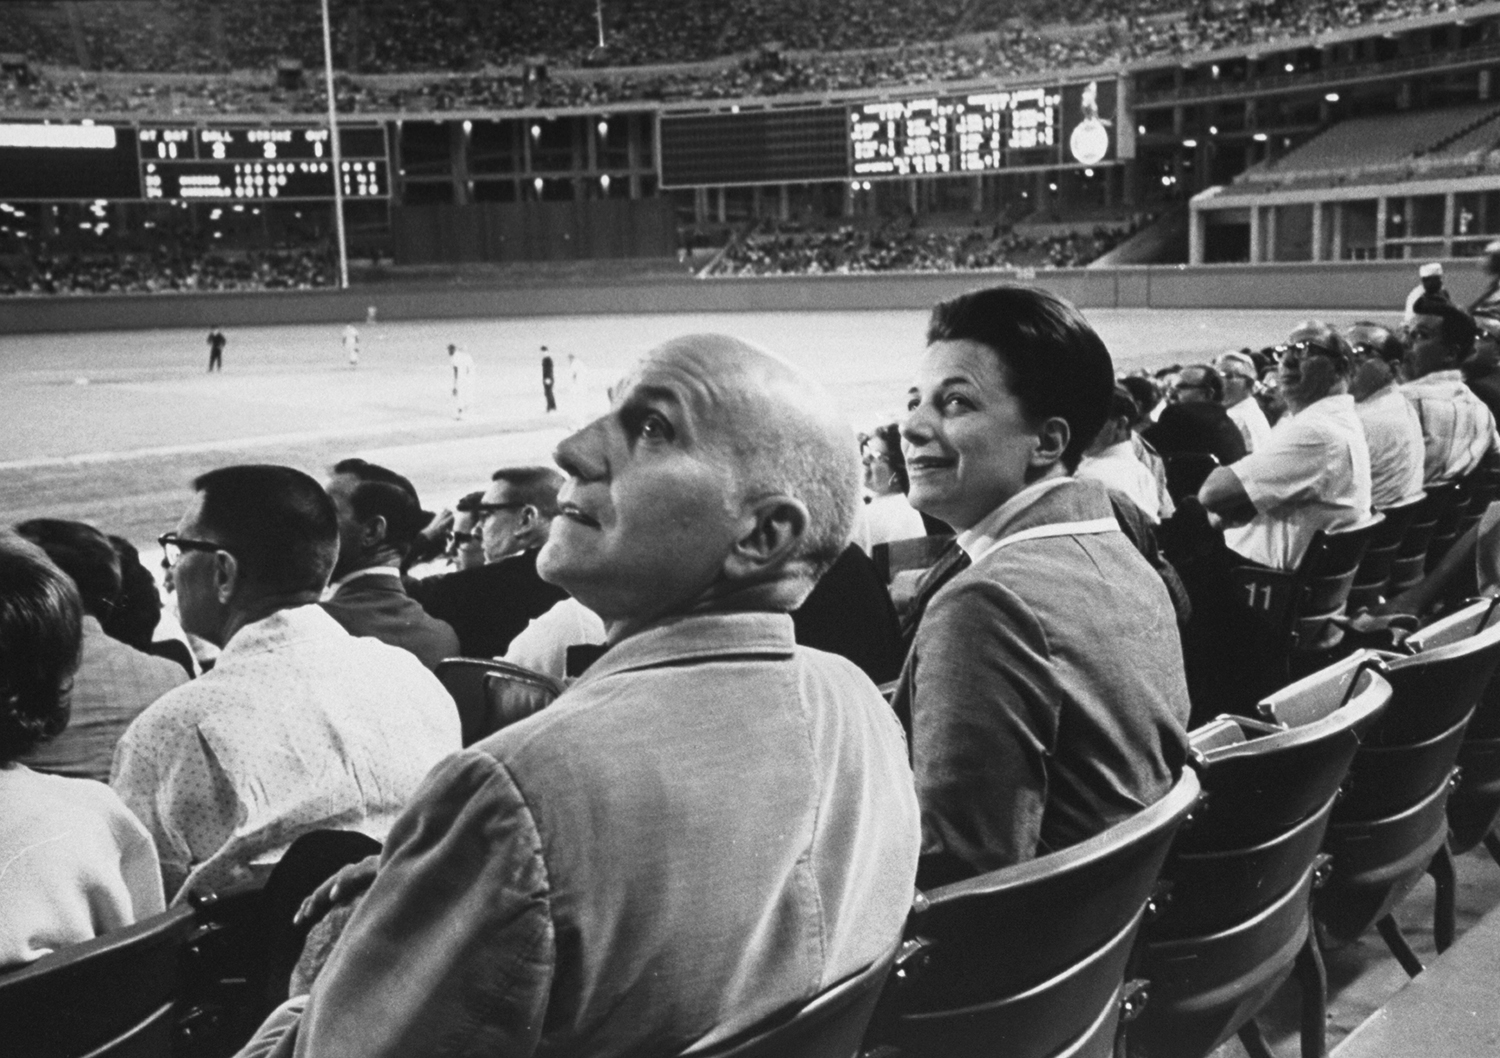 "Dr. Masters with Mrs. Johnson, watching St. Louis Cardinals play," 1966.